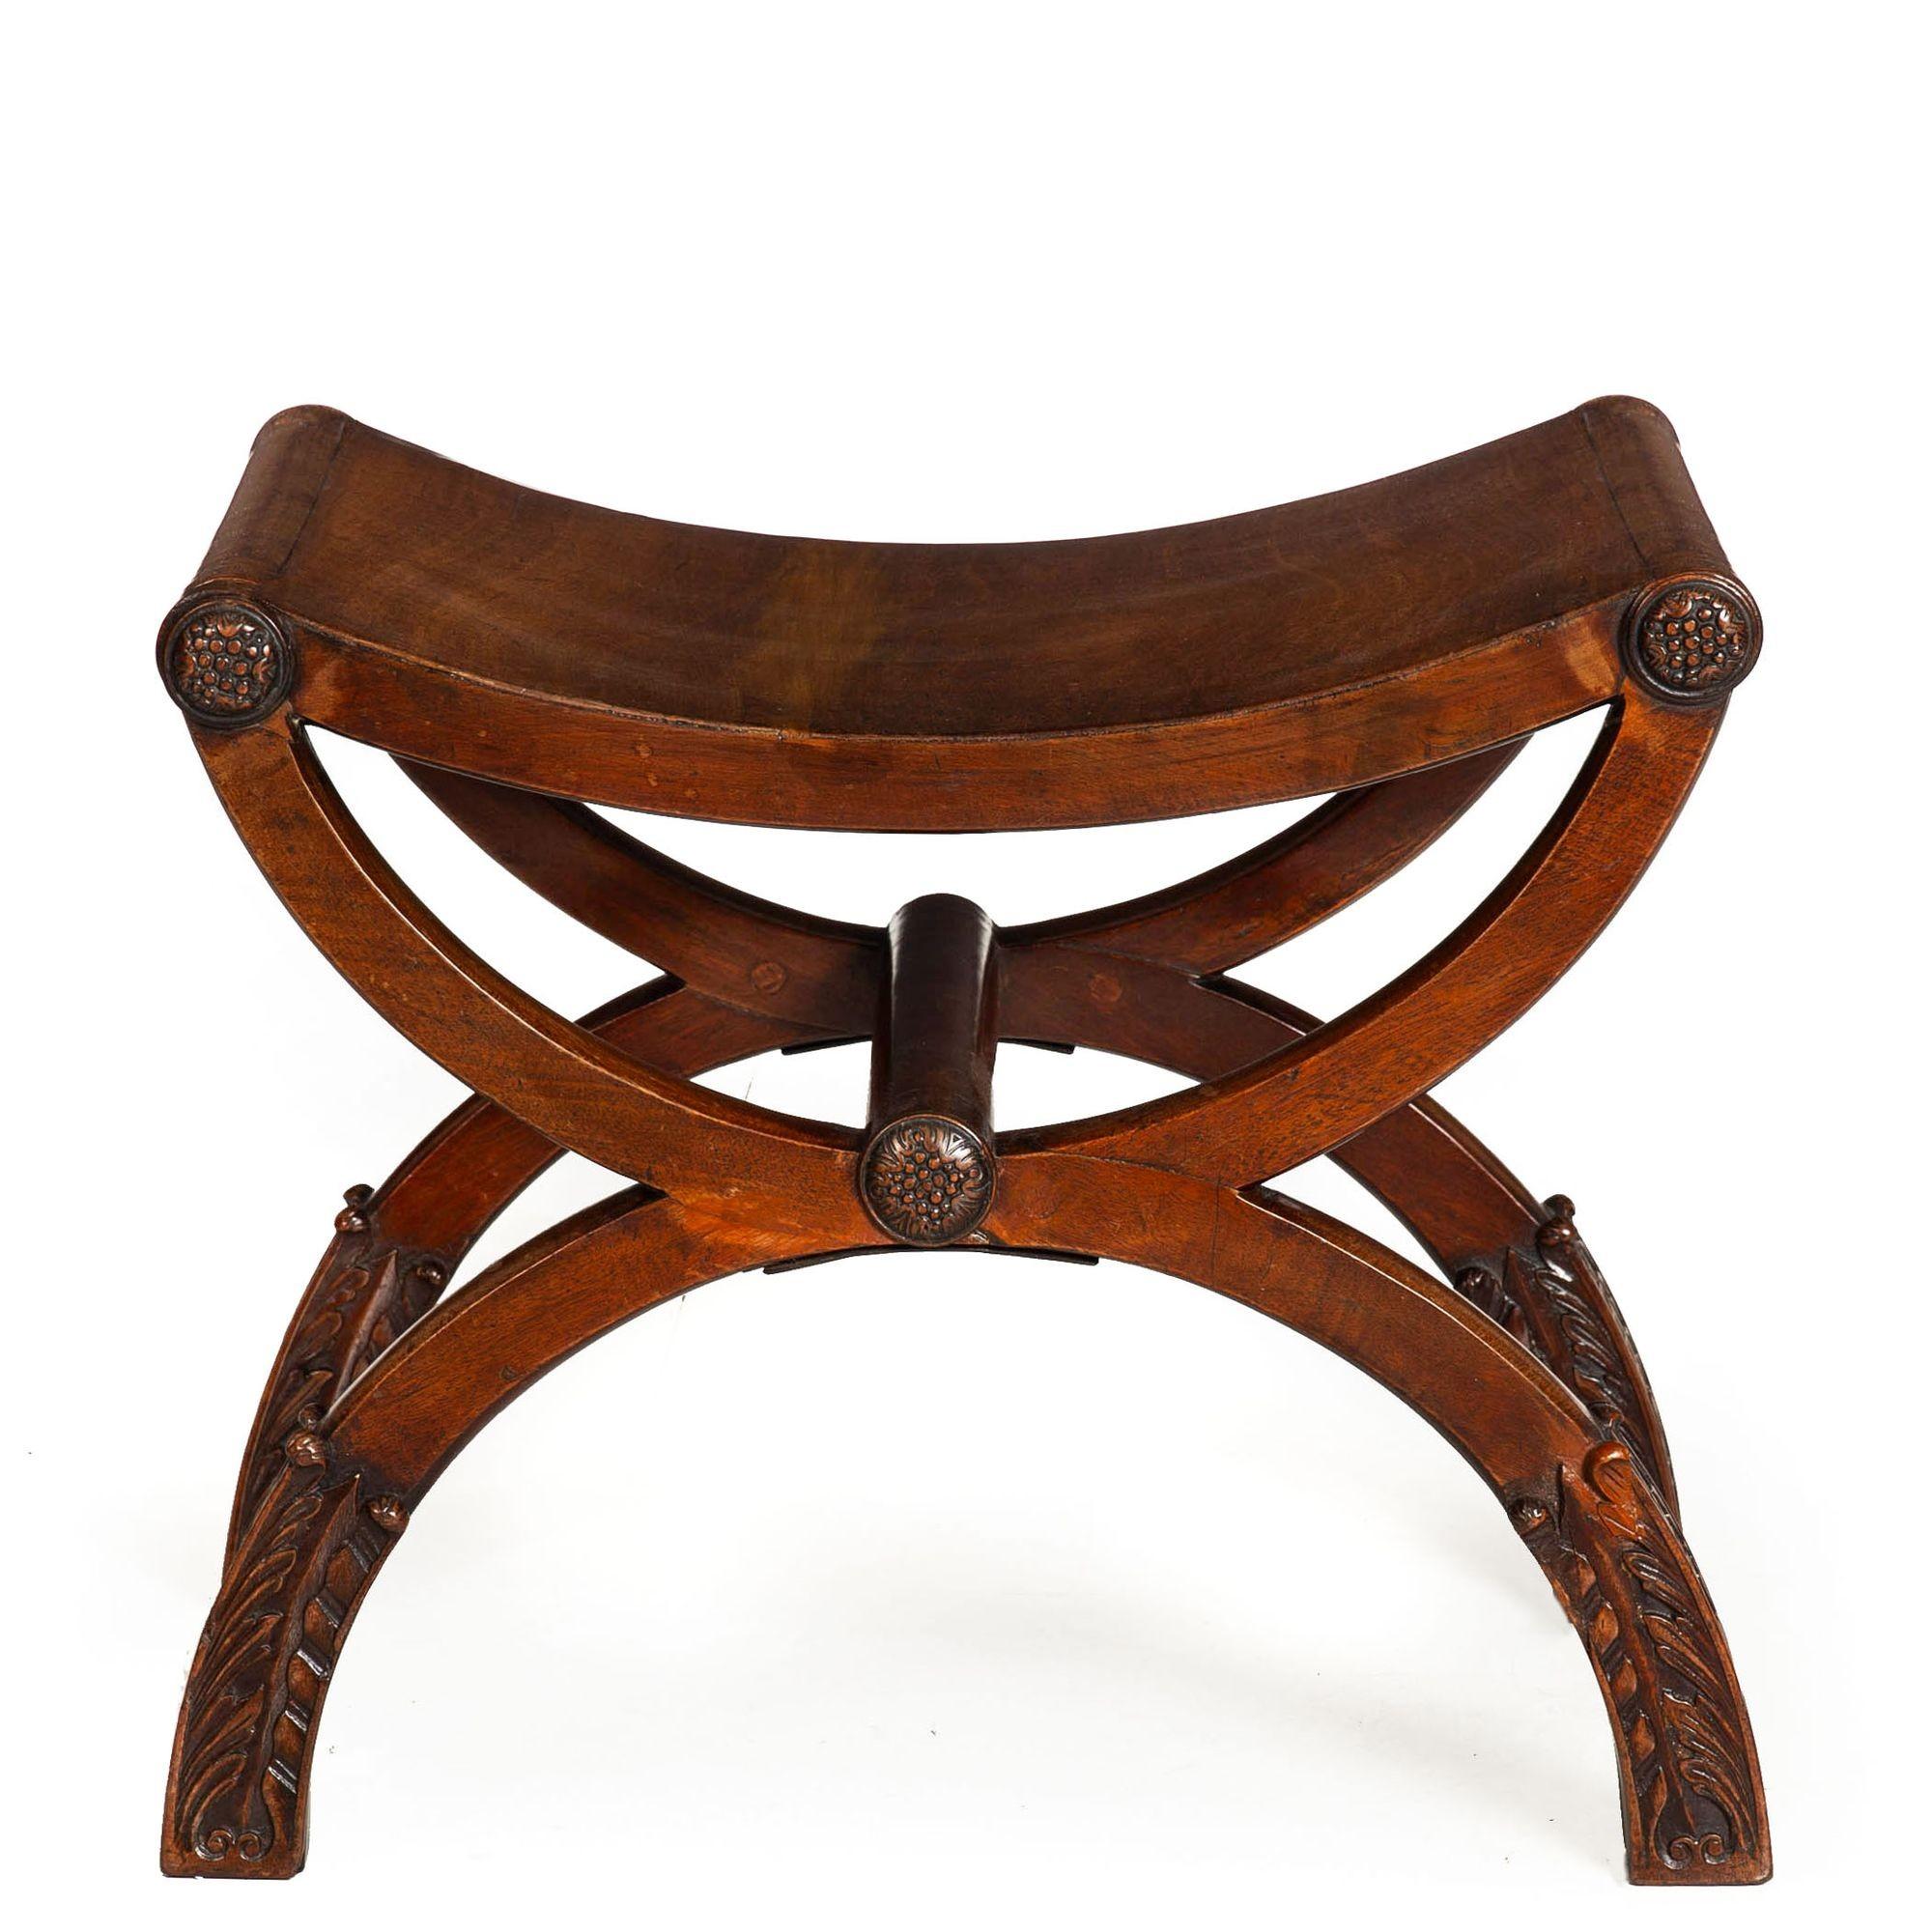 FINE REGENCY CARVED MAHOGANY CURULE BENCH
England, circa 1815
Item # 403PHK02S

Inspired by Greek antiquity, the present example is a very finely made 